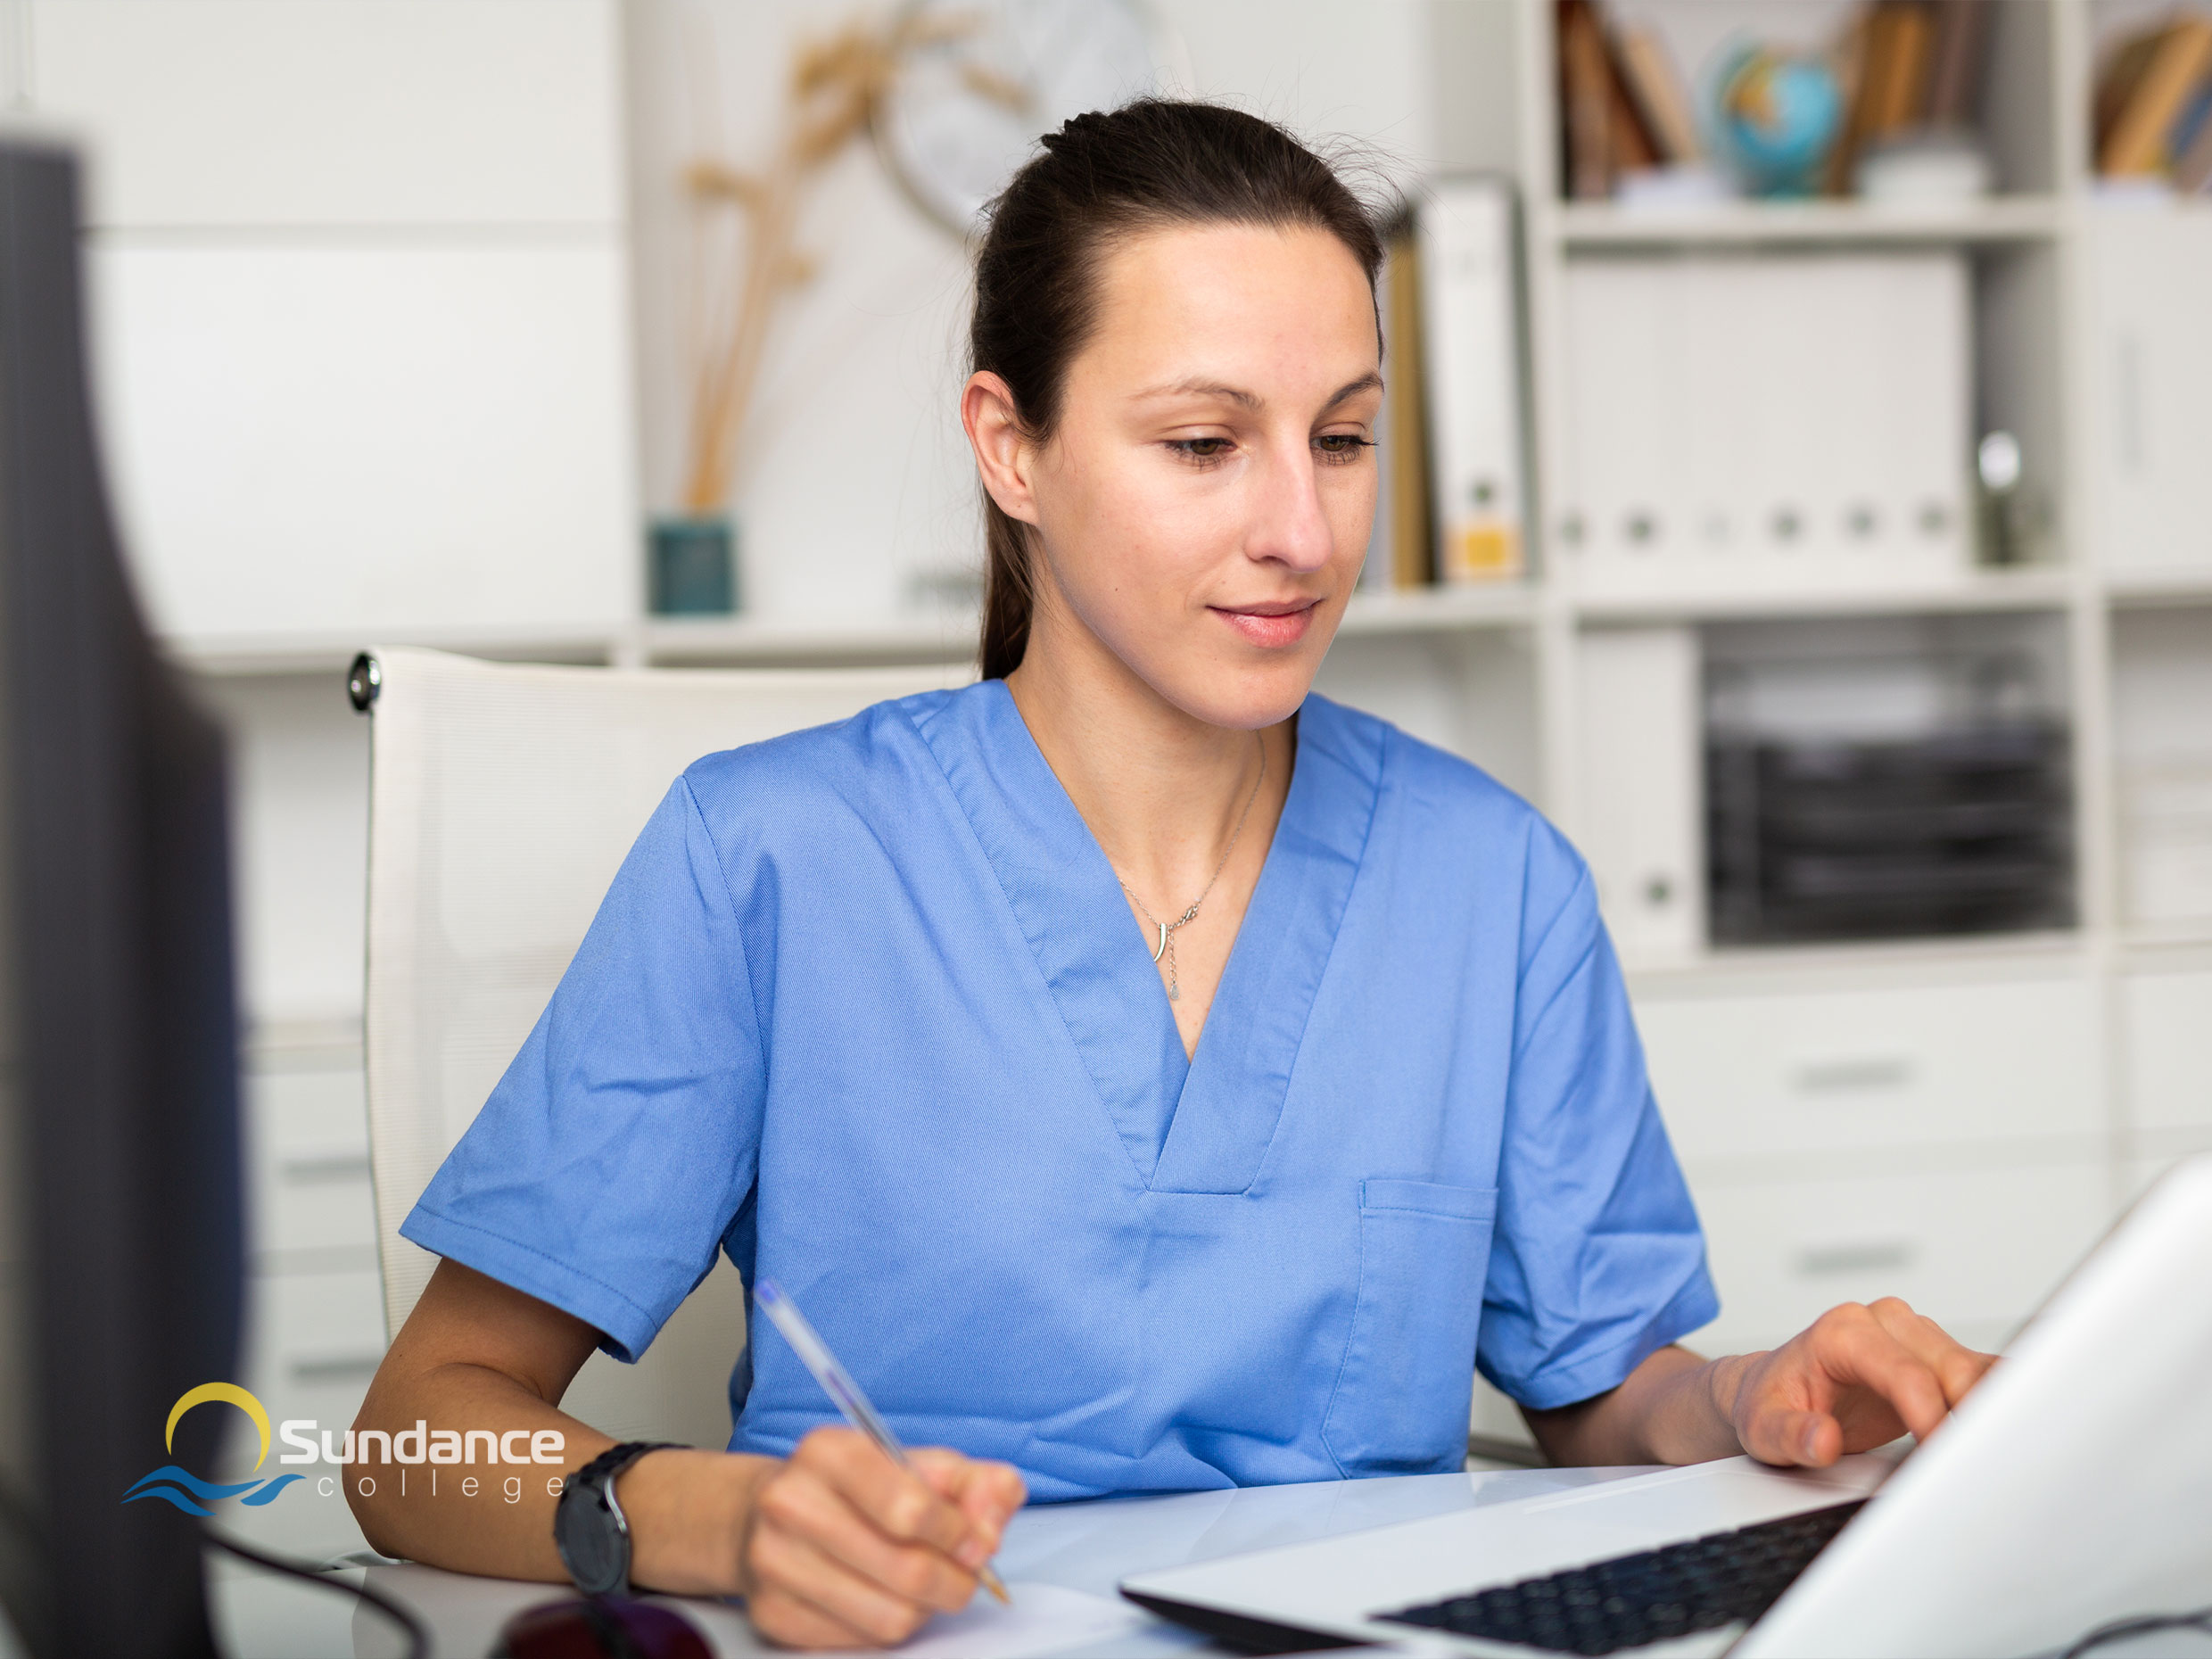 A Medical Office Assistant working on medical transcriptions